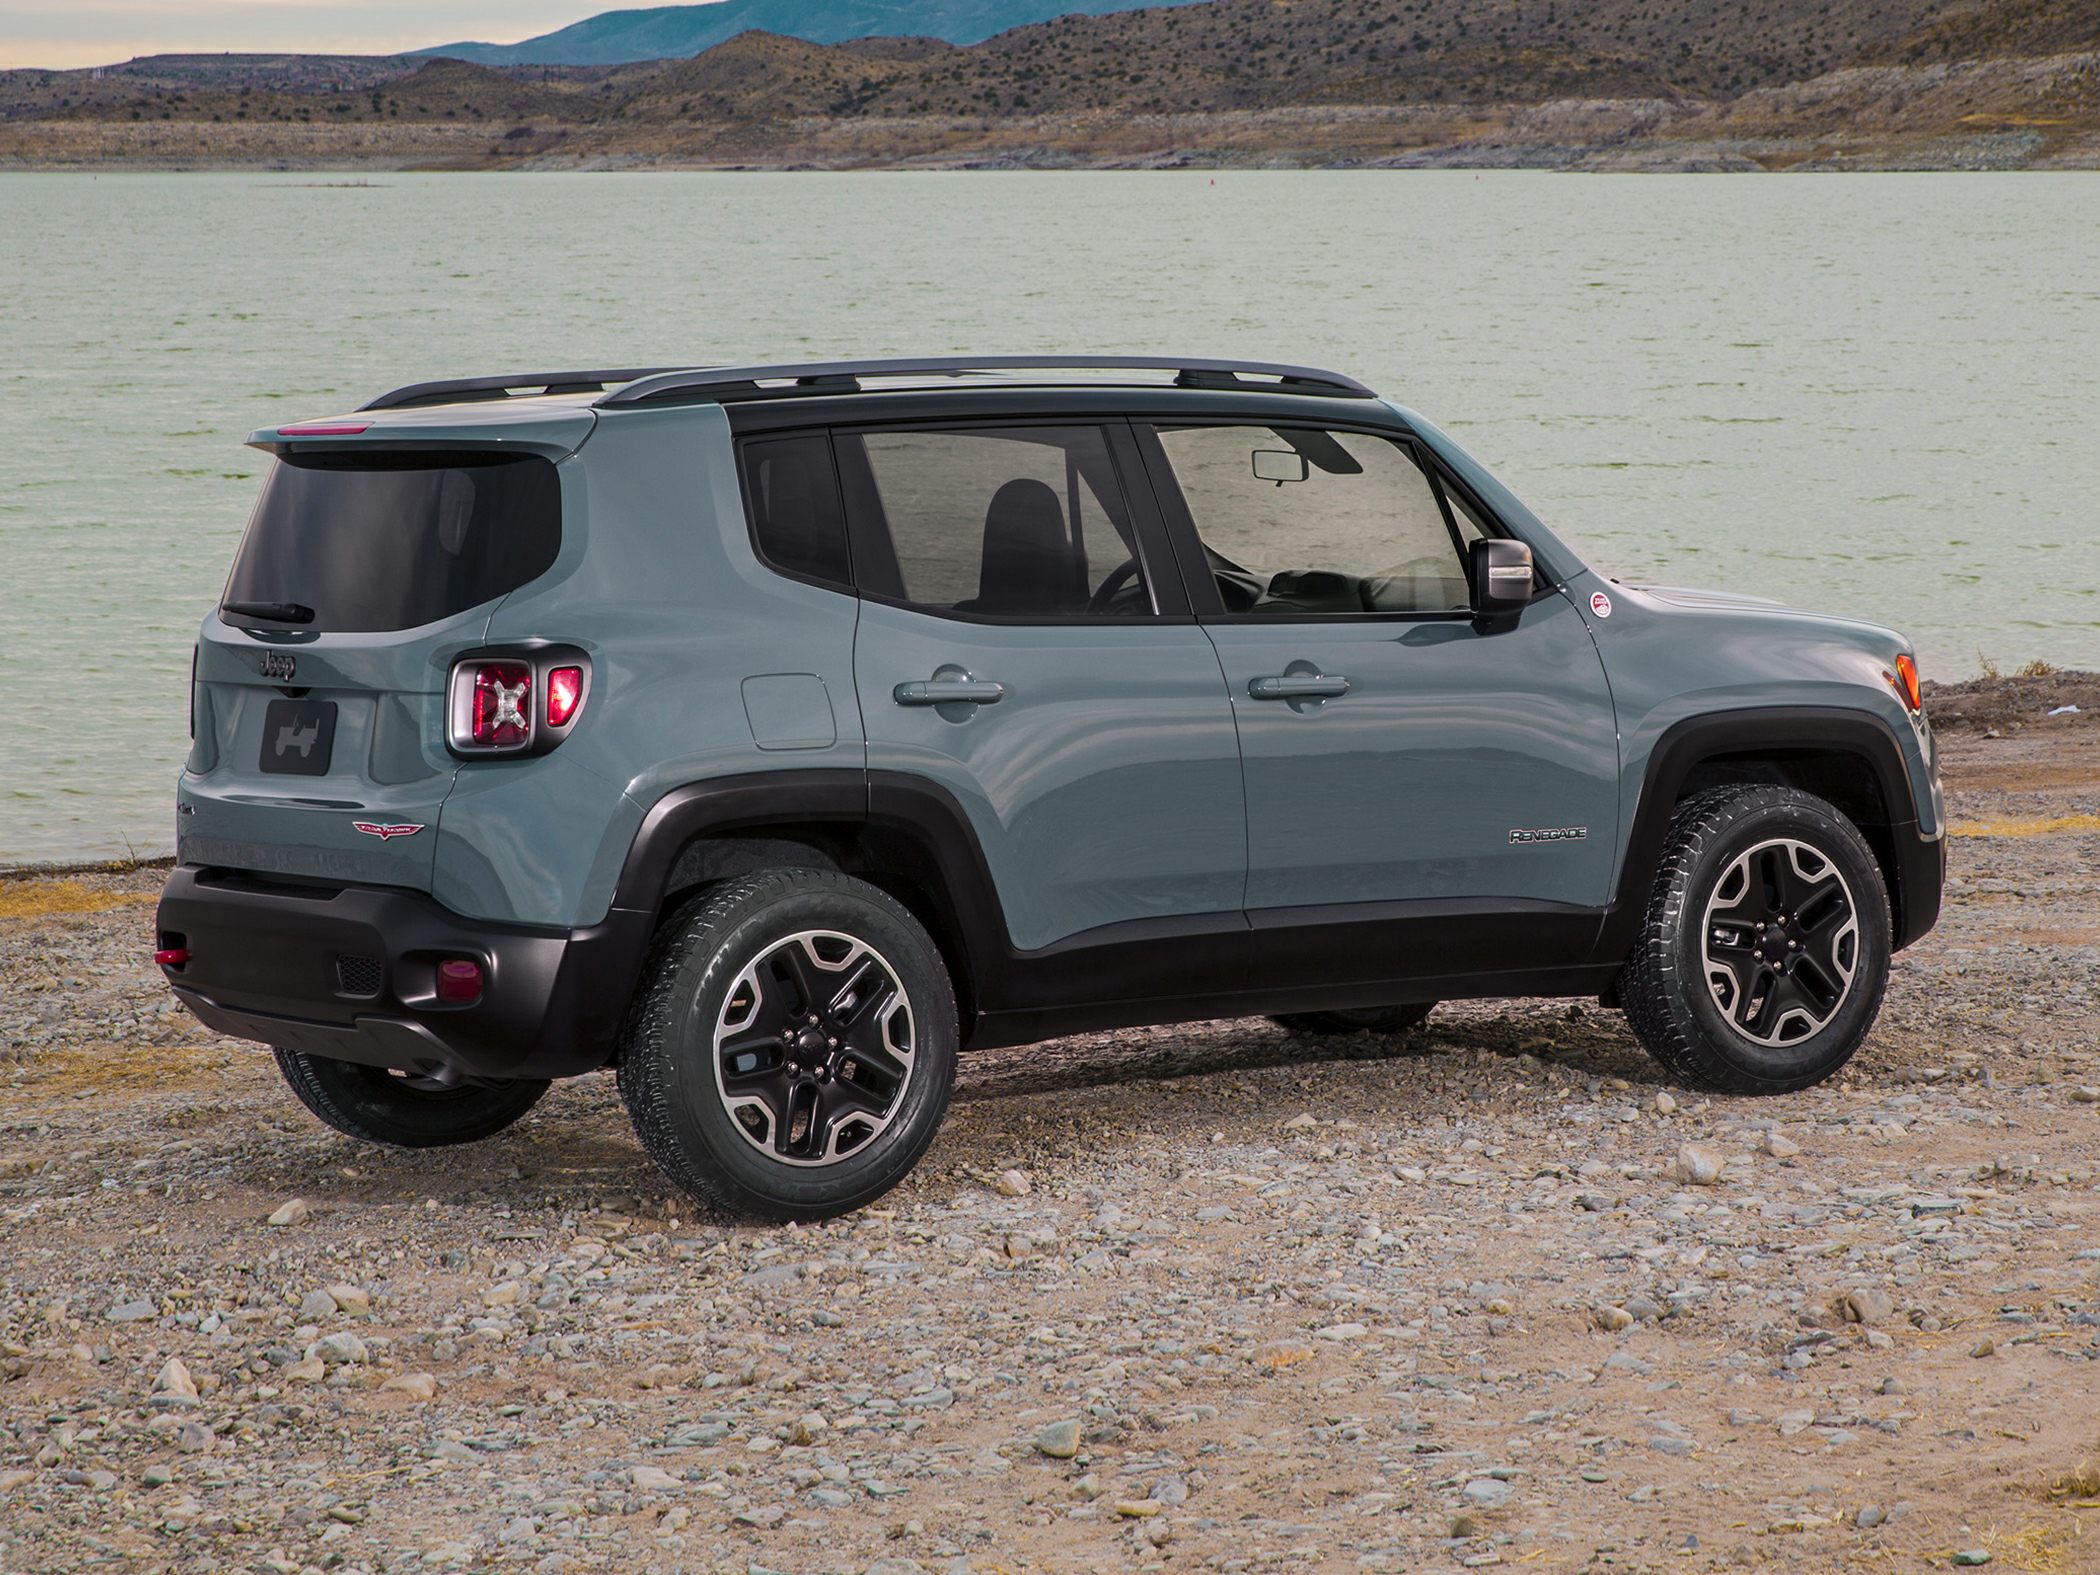 2017 Jeep Renegade Deals, Prices, Incentives & Leases, Overview